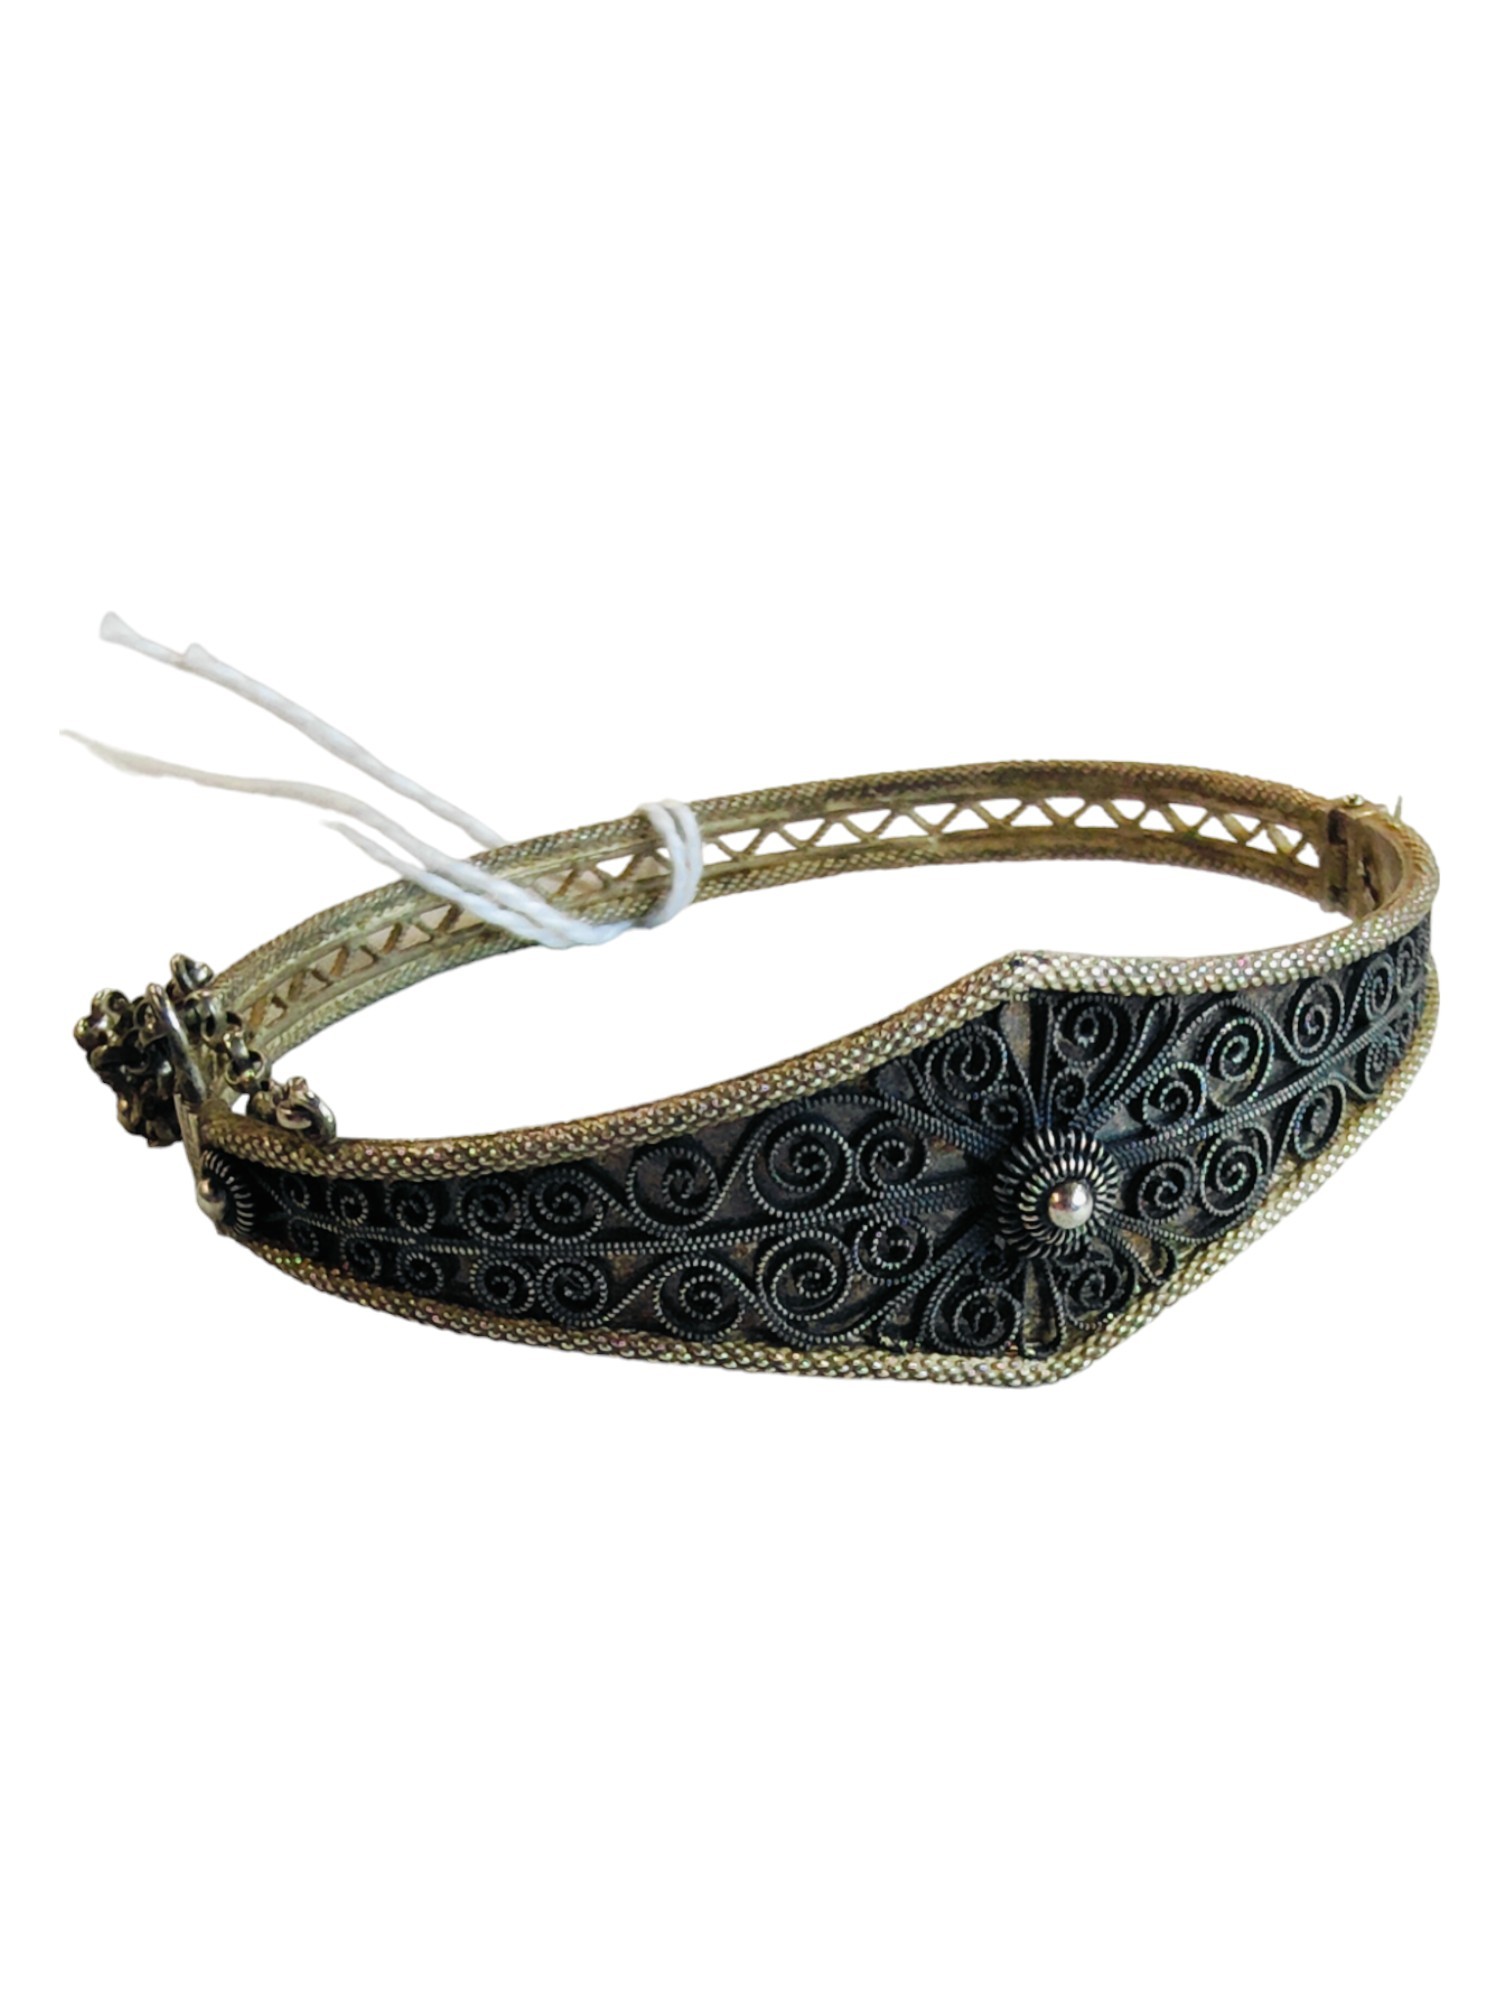 HIGHLY COLLECTABLE SILVER FILIGREE BANGLE BY MARUIS HAMMER OF BERGEN, NORWAY